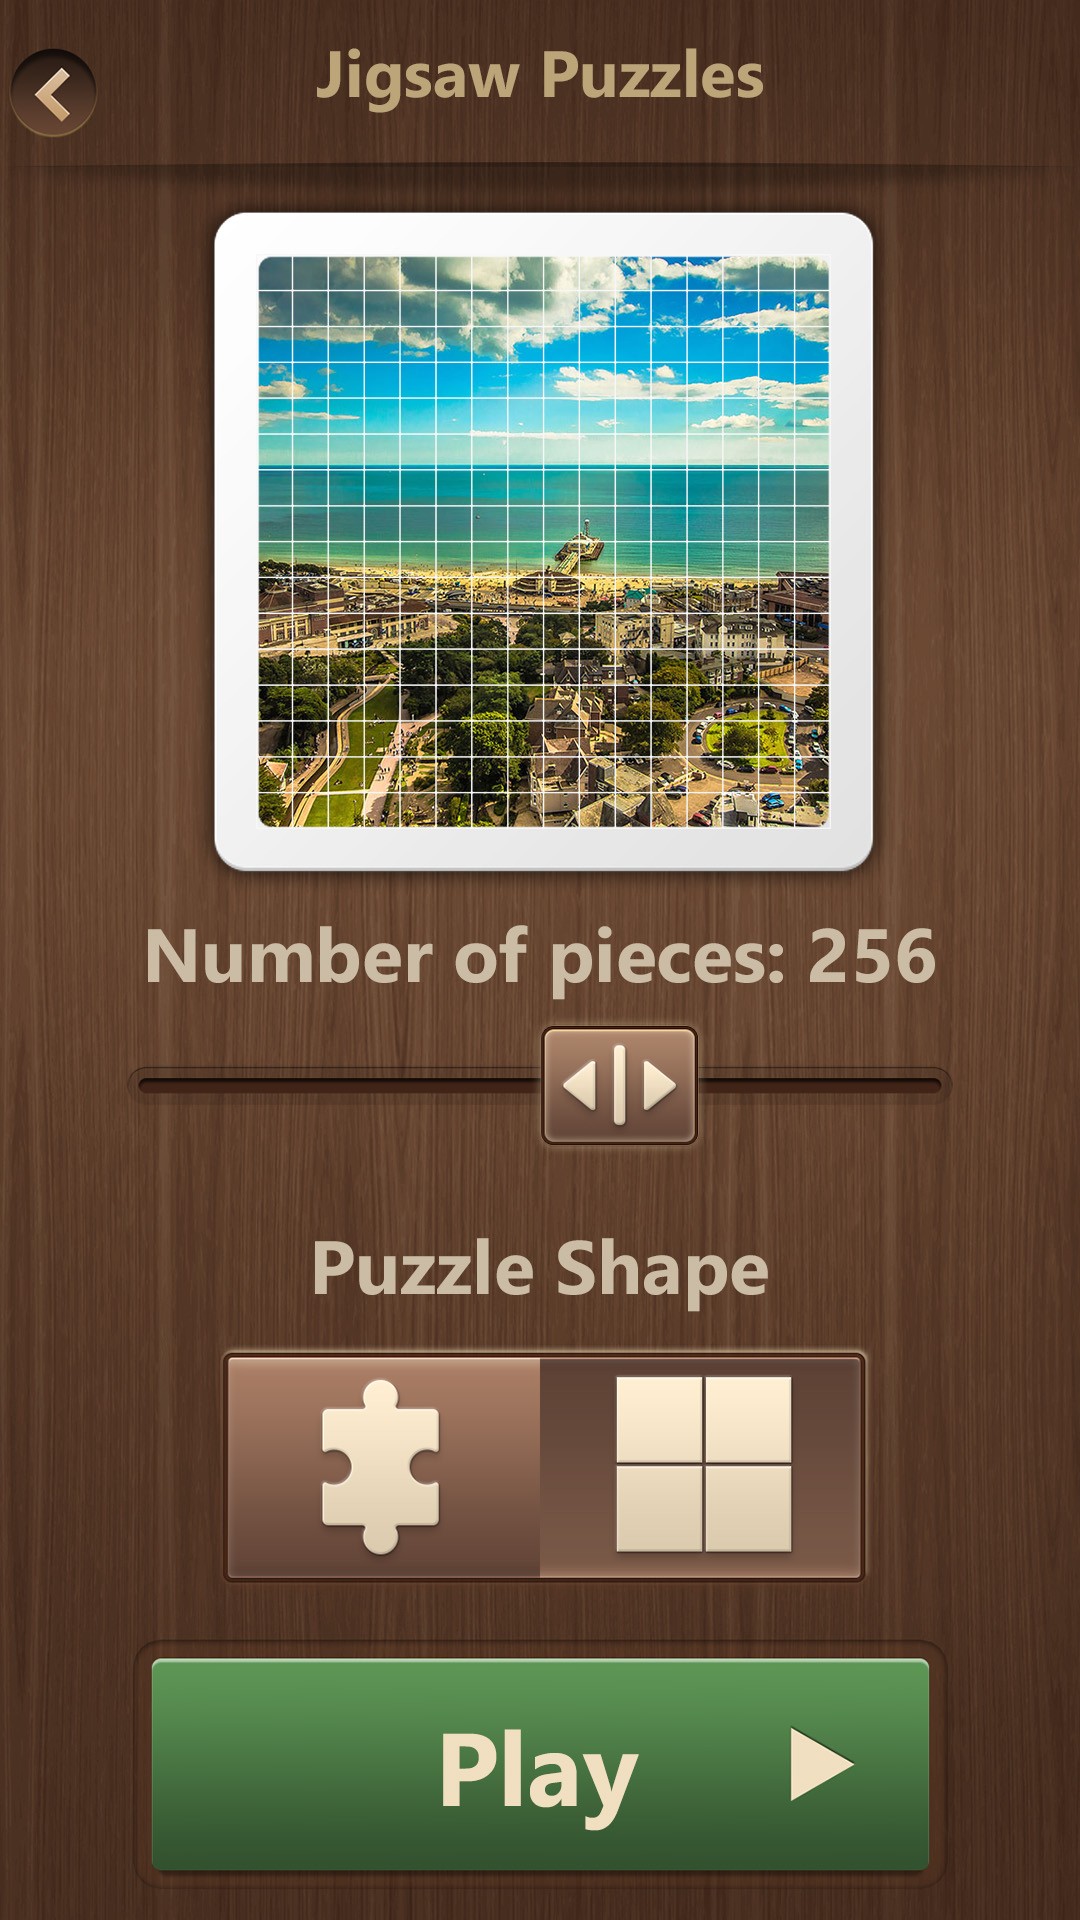 Real Jigsaw Puzzles